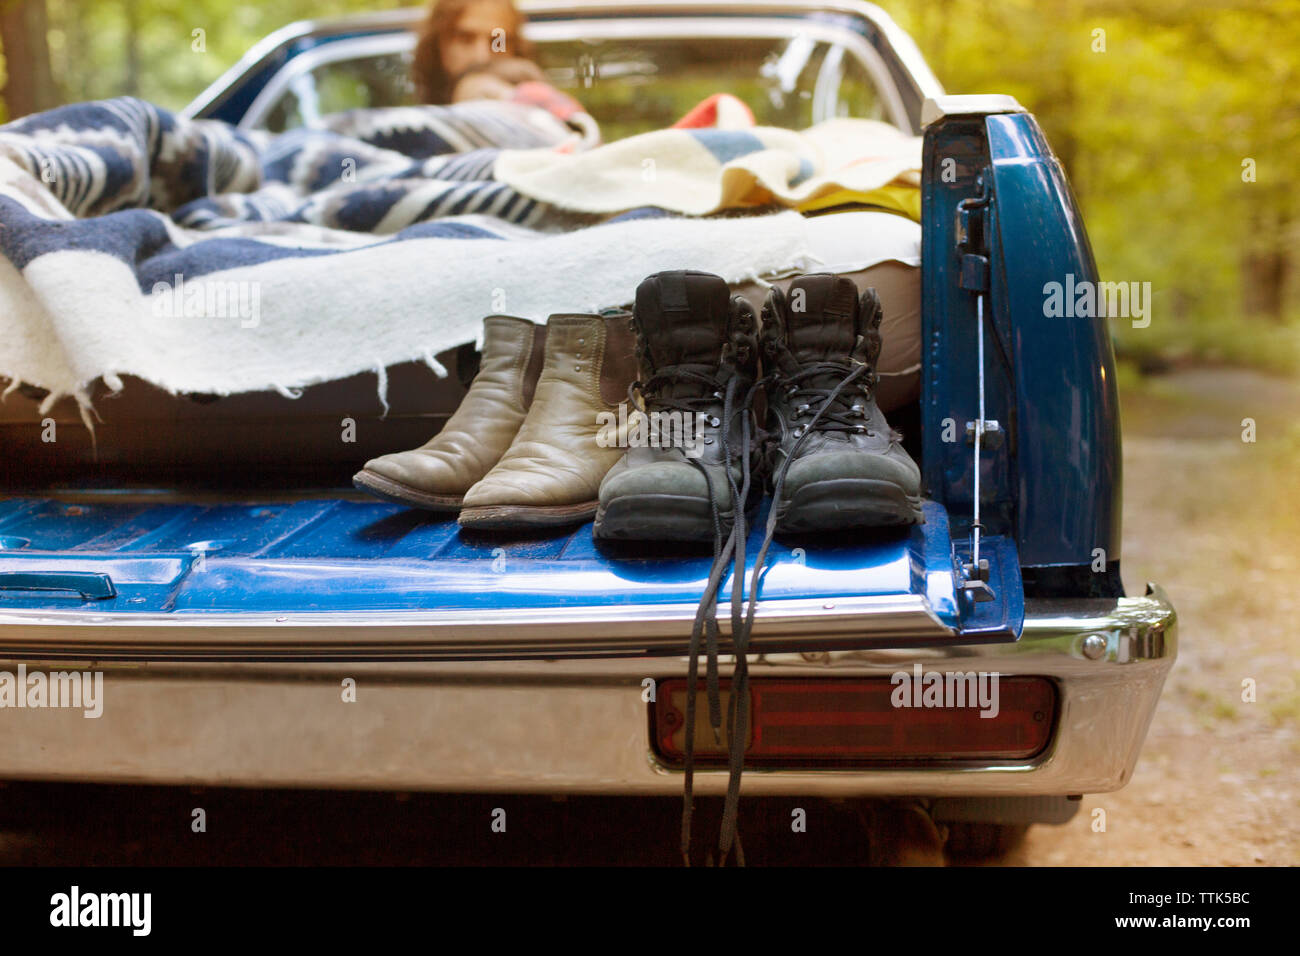 Shoes on pick-up truck with couple relaxing in background Stock Photo